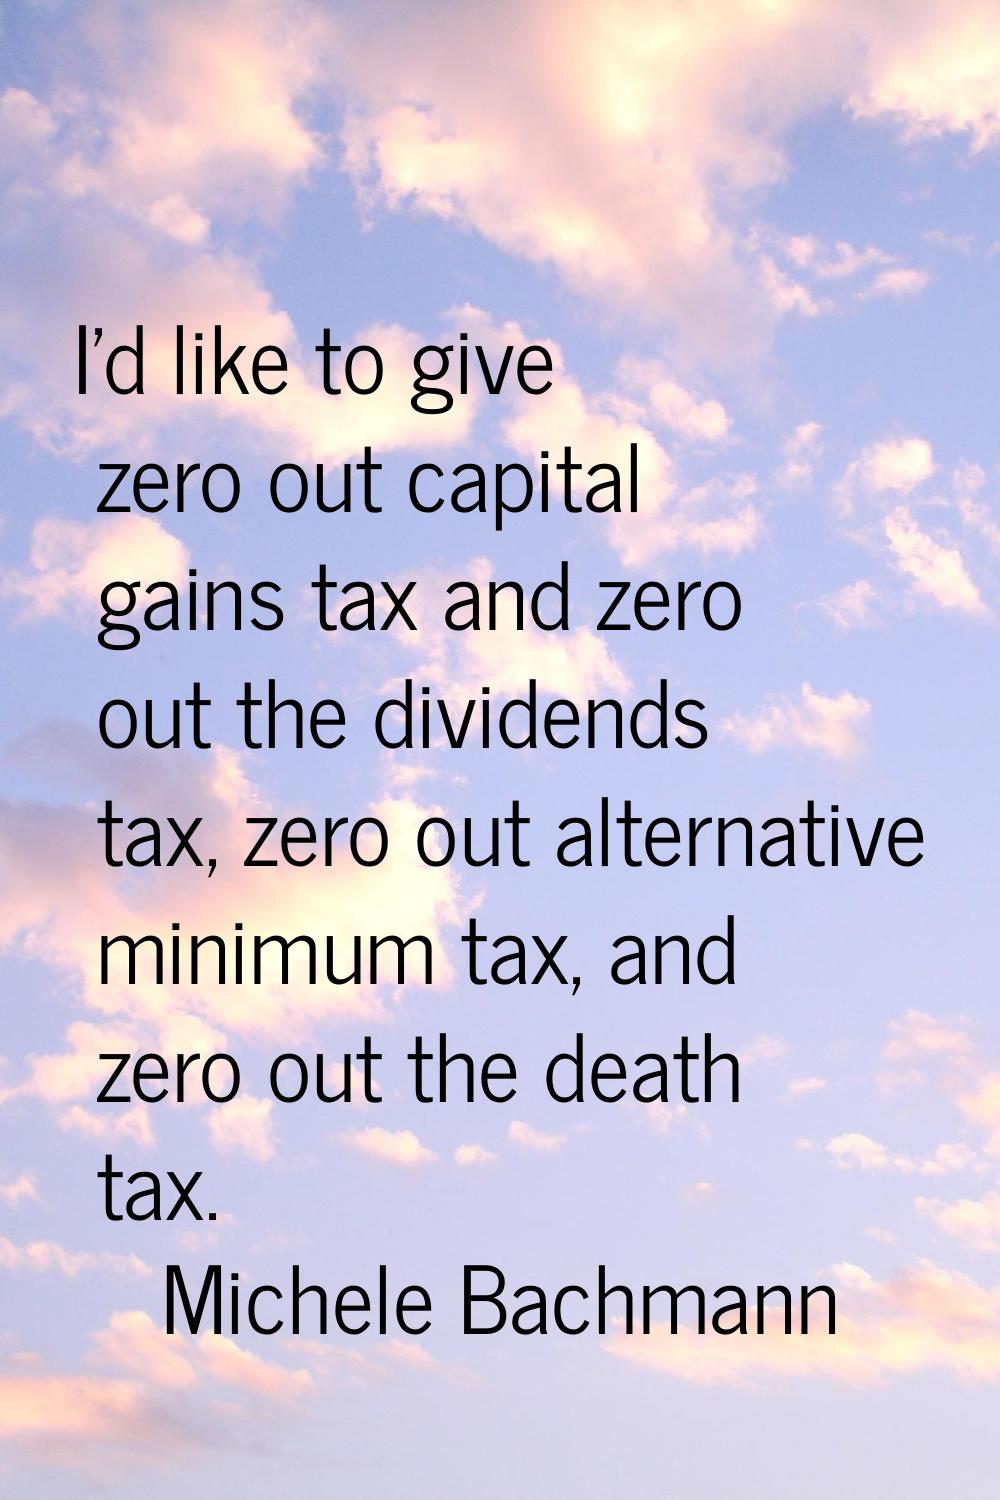 I'd like to give zero out capital gains tax and zero out the dividends tax, zero out alternative mi